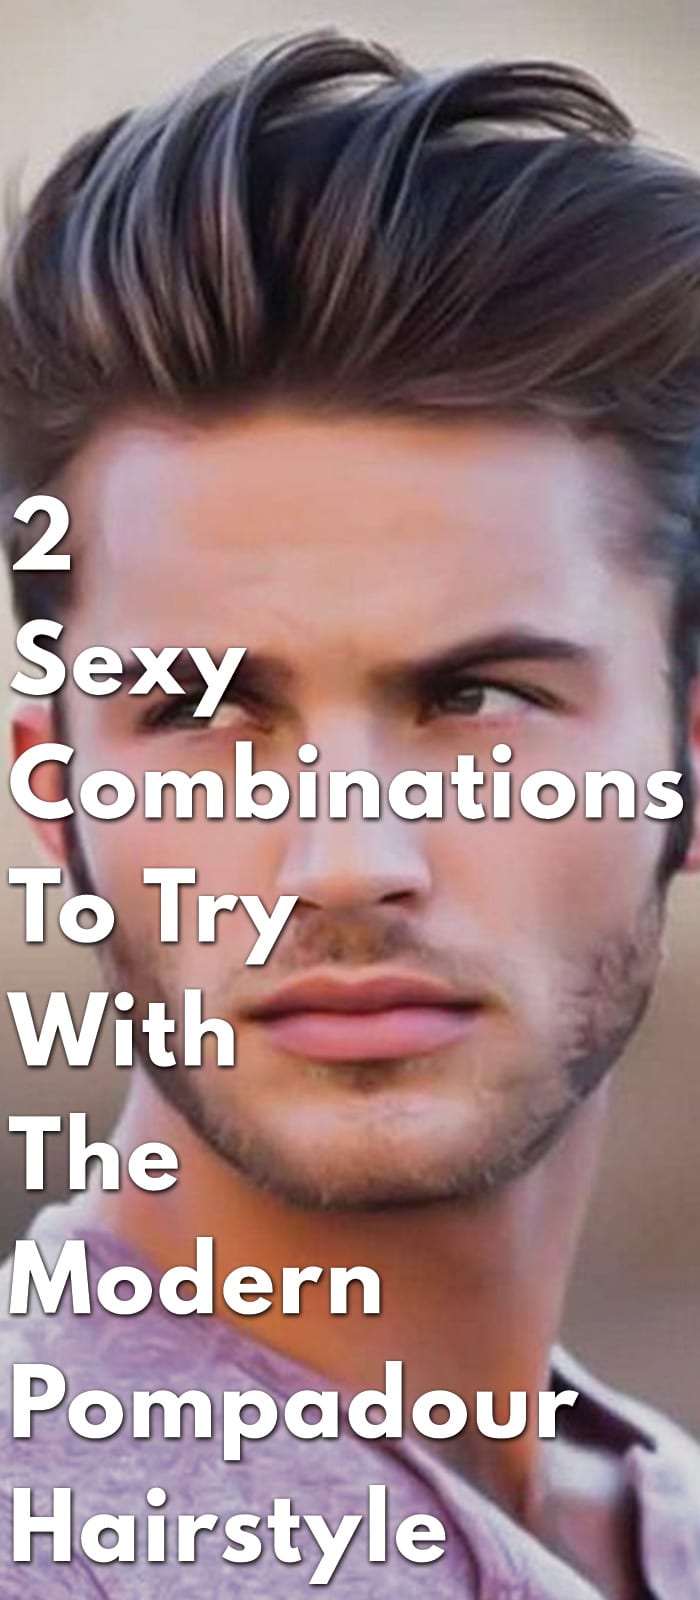 2 Sexy Combinations To Try With The Modern Pompadour Hairstyle